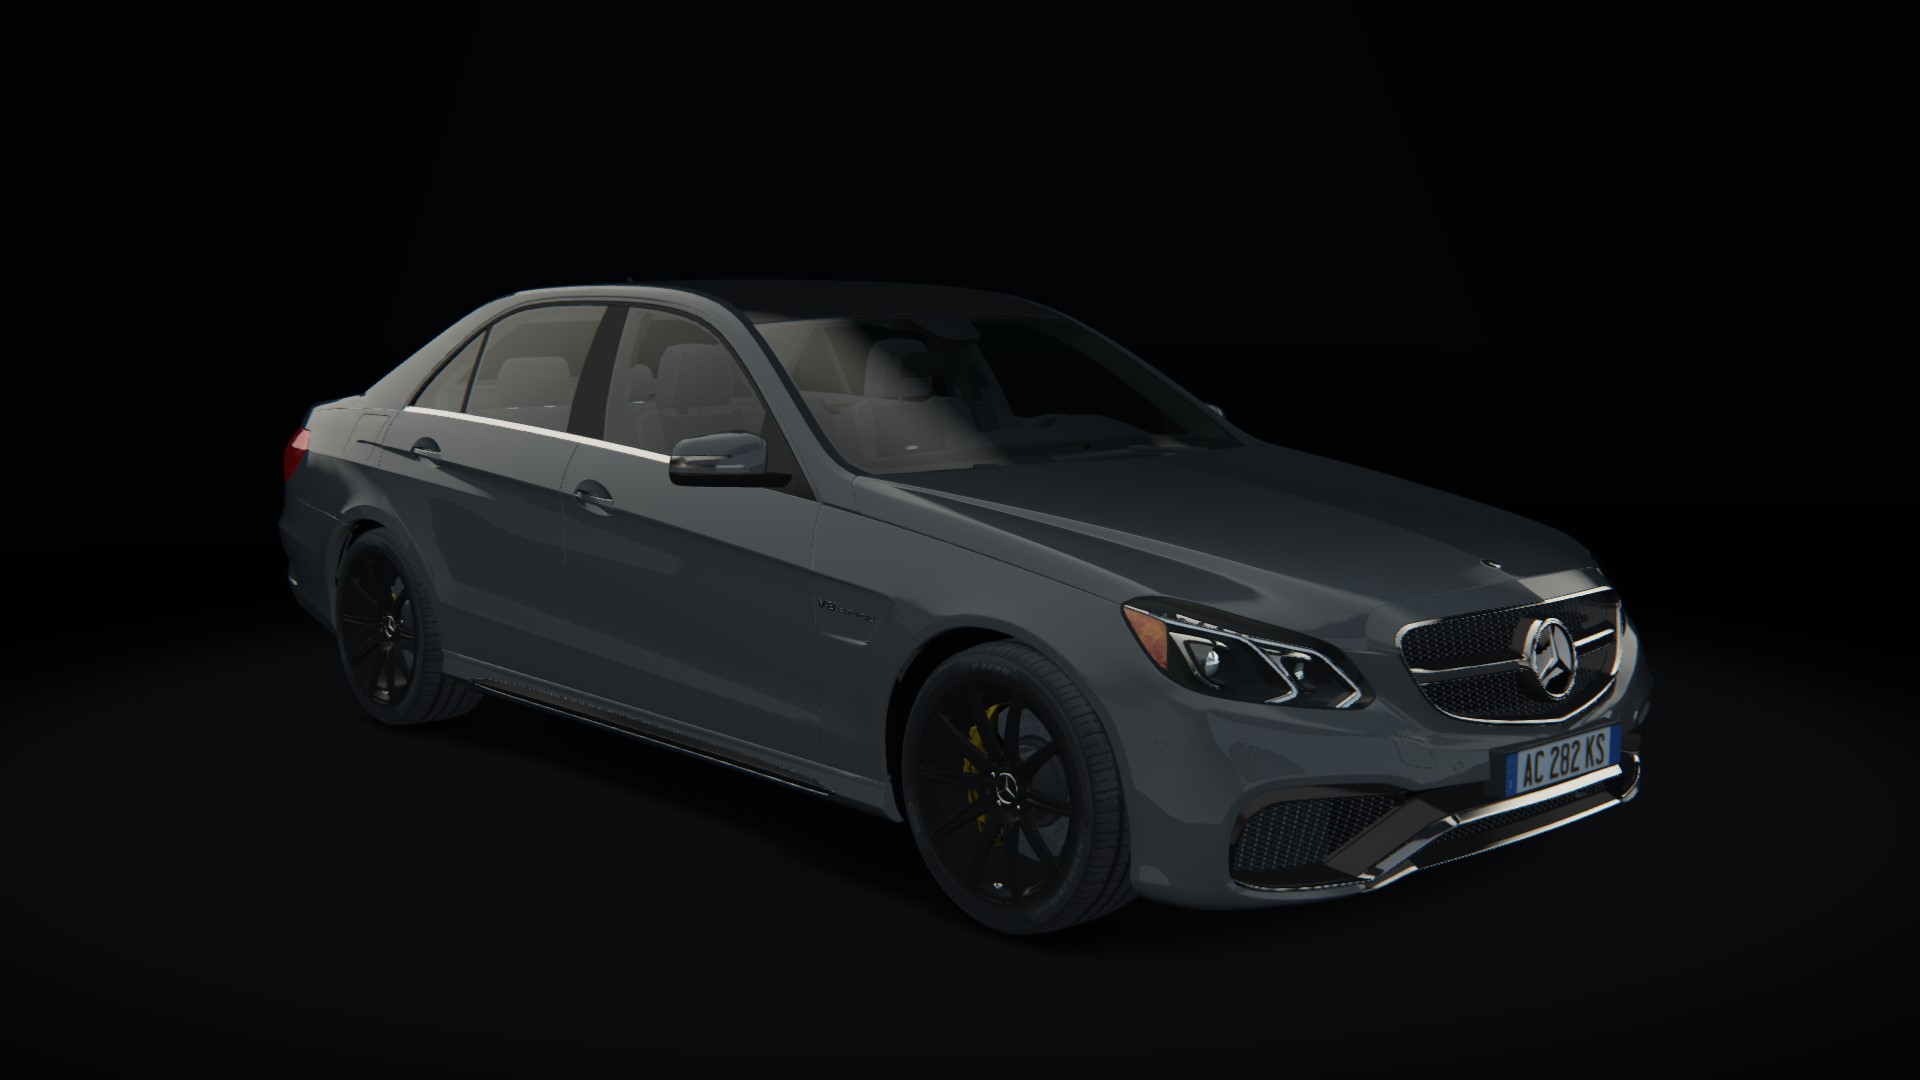 Mercedes-Benz E63 AMG 4MATIC Preview Image